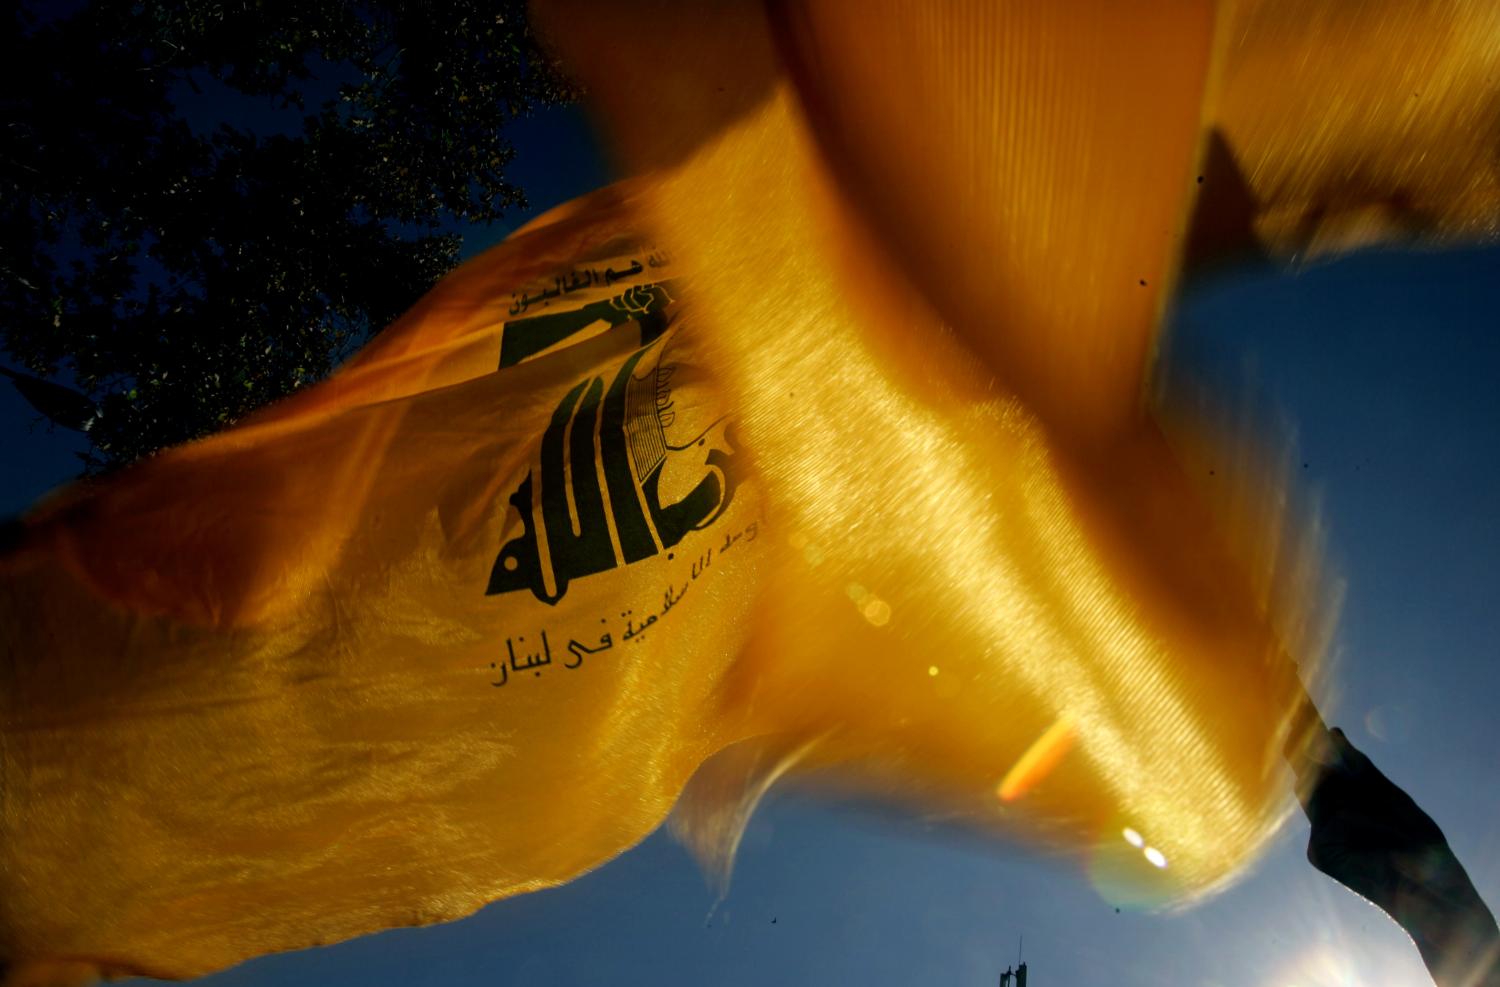 An Iranian protester (unseen) waves the Lebanon's Hezbollah's flag during a rally in front of the former U.S. embassy in Tehran to mark the anniversary of Student's Day November 4, 2006. Thousands of Iranians on Saturday chanted "Death to America" outside the former U.S. embassy which students stormed on this day in 1979, renewing Iran's defiance at a time when it faces possible sanctions for its nuclear work. REUTERS/Morteza Nikoubazl(IRAN) - GM1DTWFPDLAA